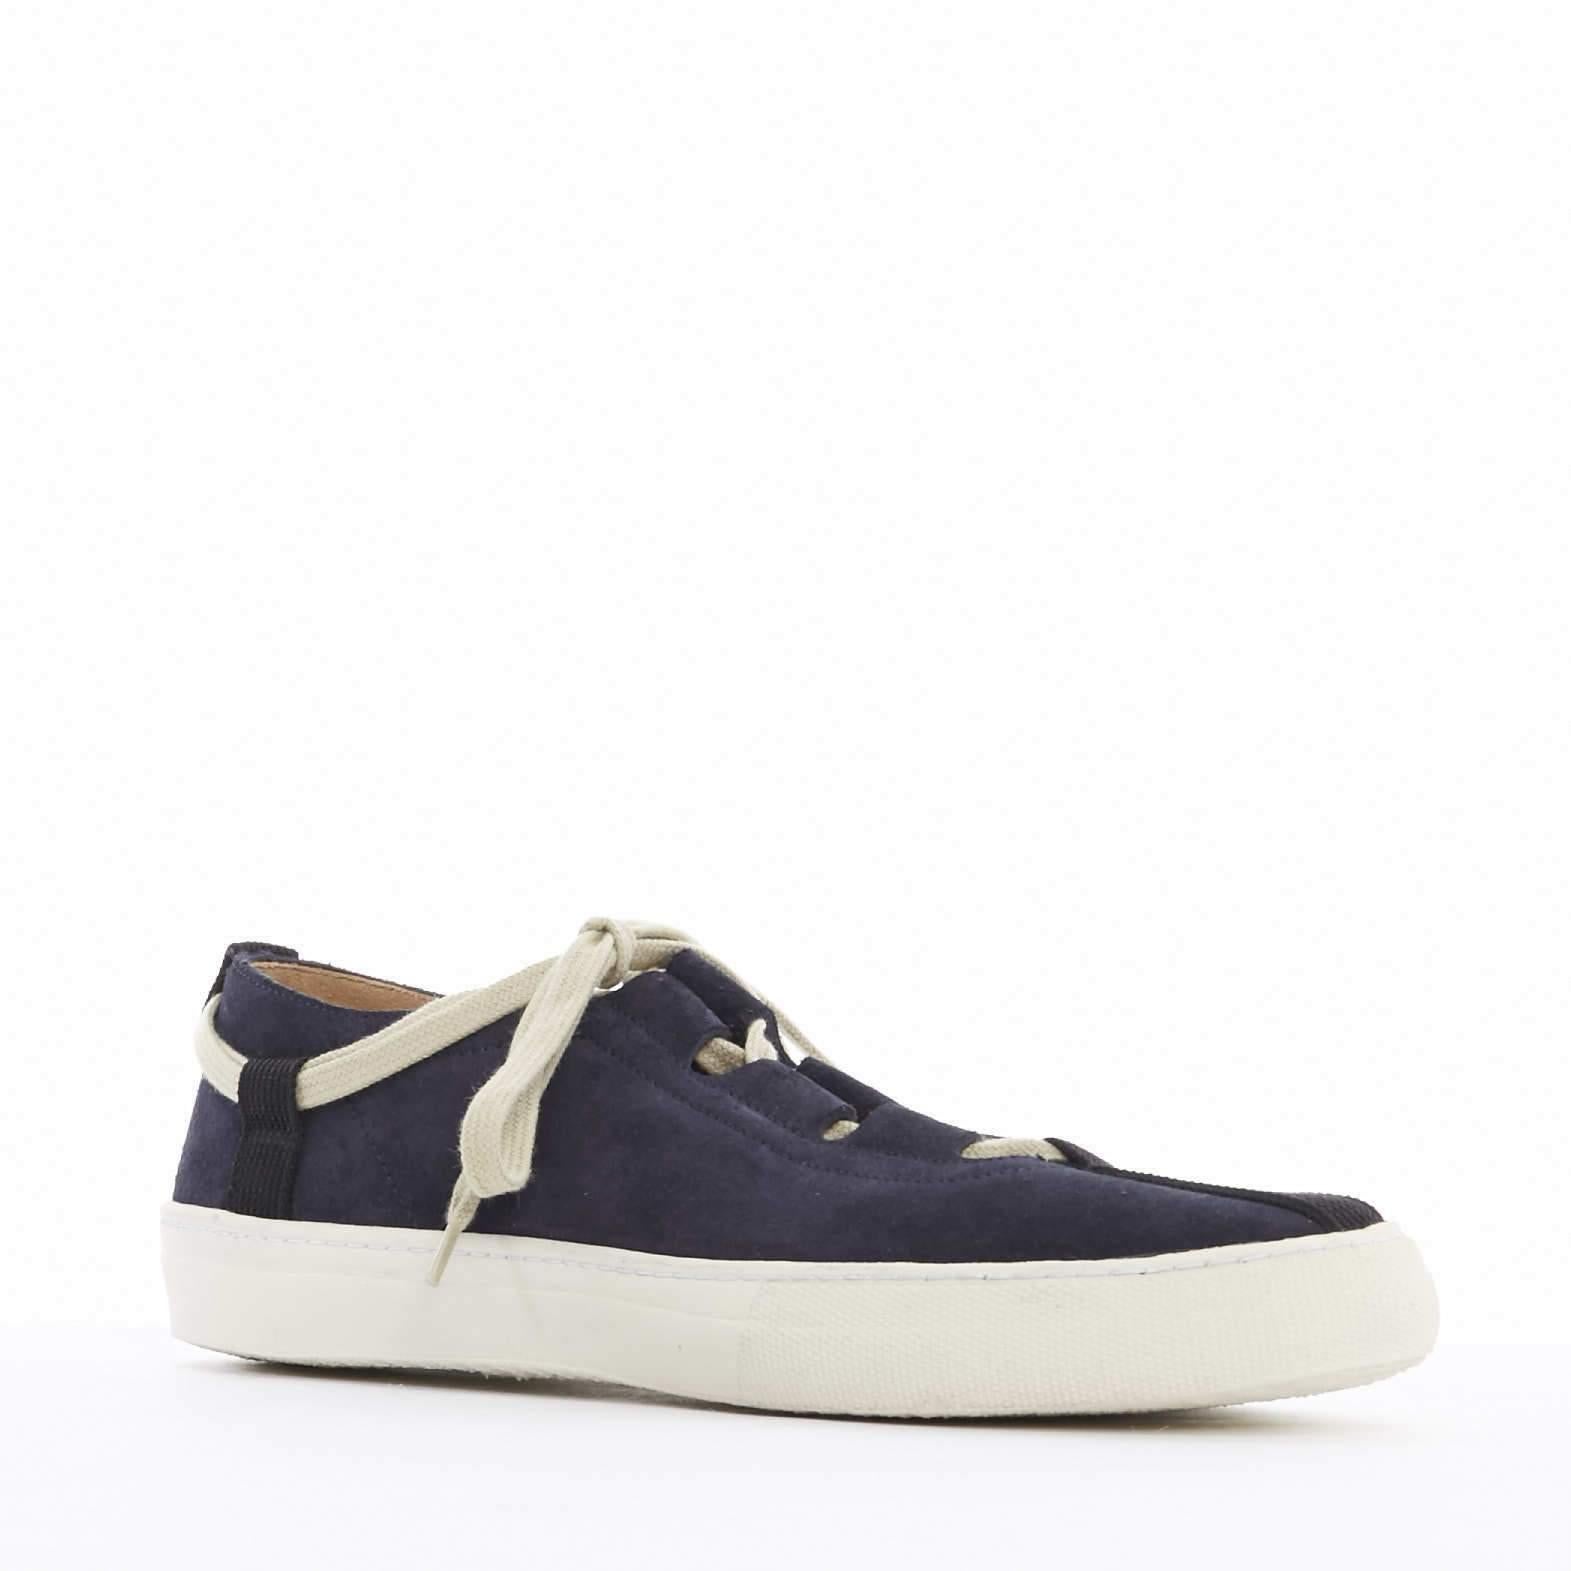 new DRIES VAN NOTEN navy blue suede cut out lace up skate sneakers shoes EU41

DRIES VAN NOTEN
Navy blue suede leather upper . Black looped grosgrain trimming at toe . Rounded toe . Cut out and lace up front . White rubber . 
Made in